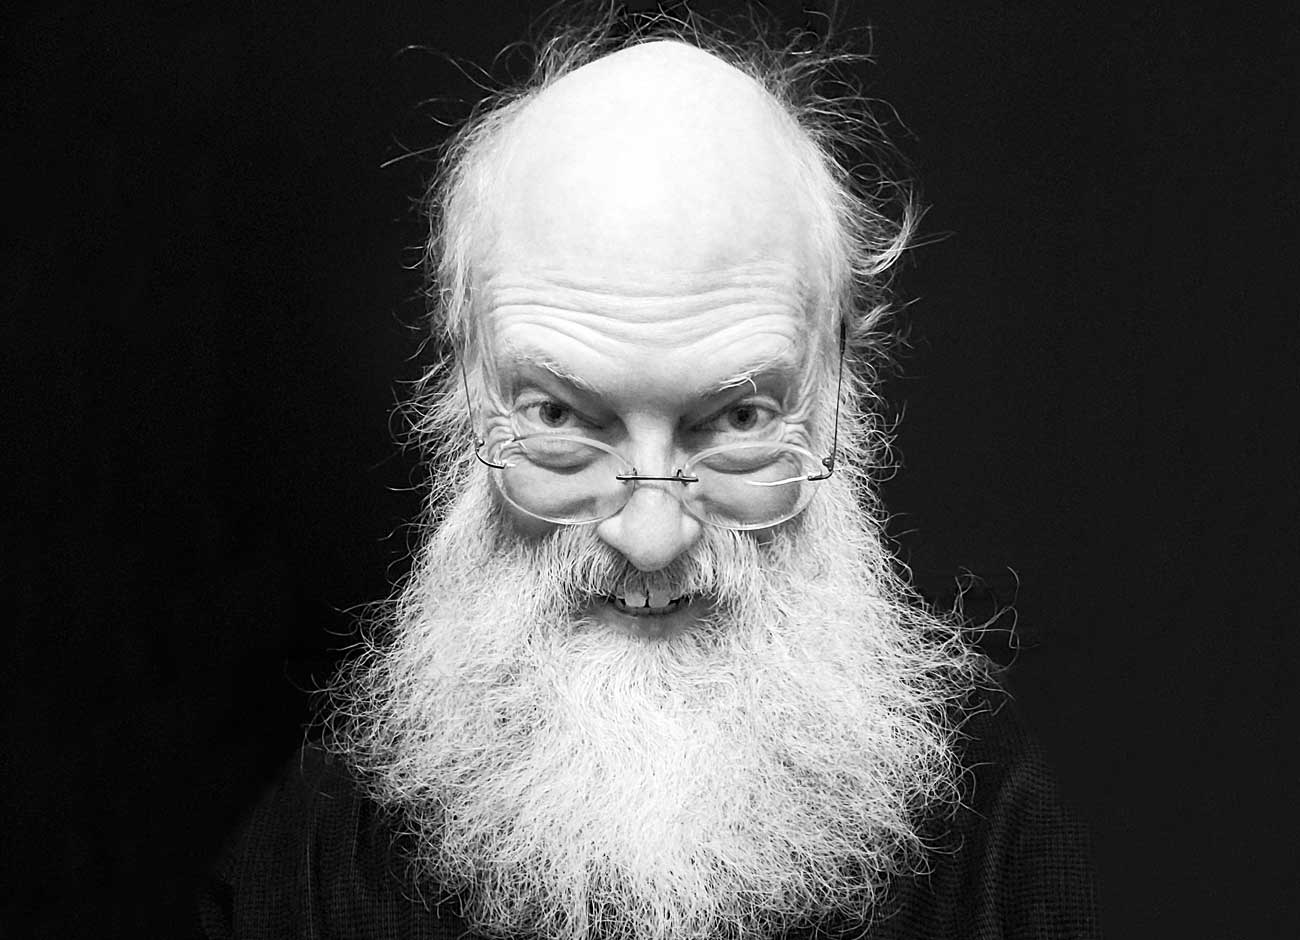 a black and white image of a 52 year old man smiling and wearing glasses. He has a long wispy white beard